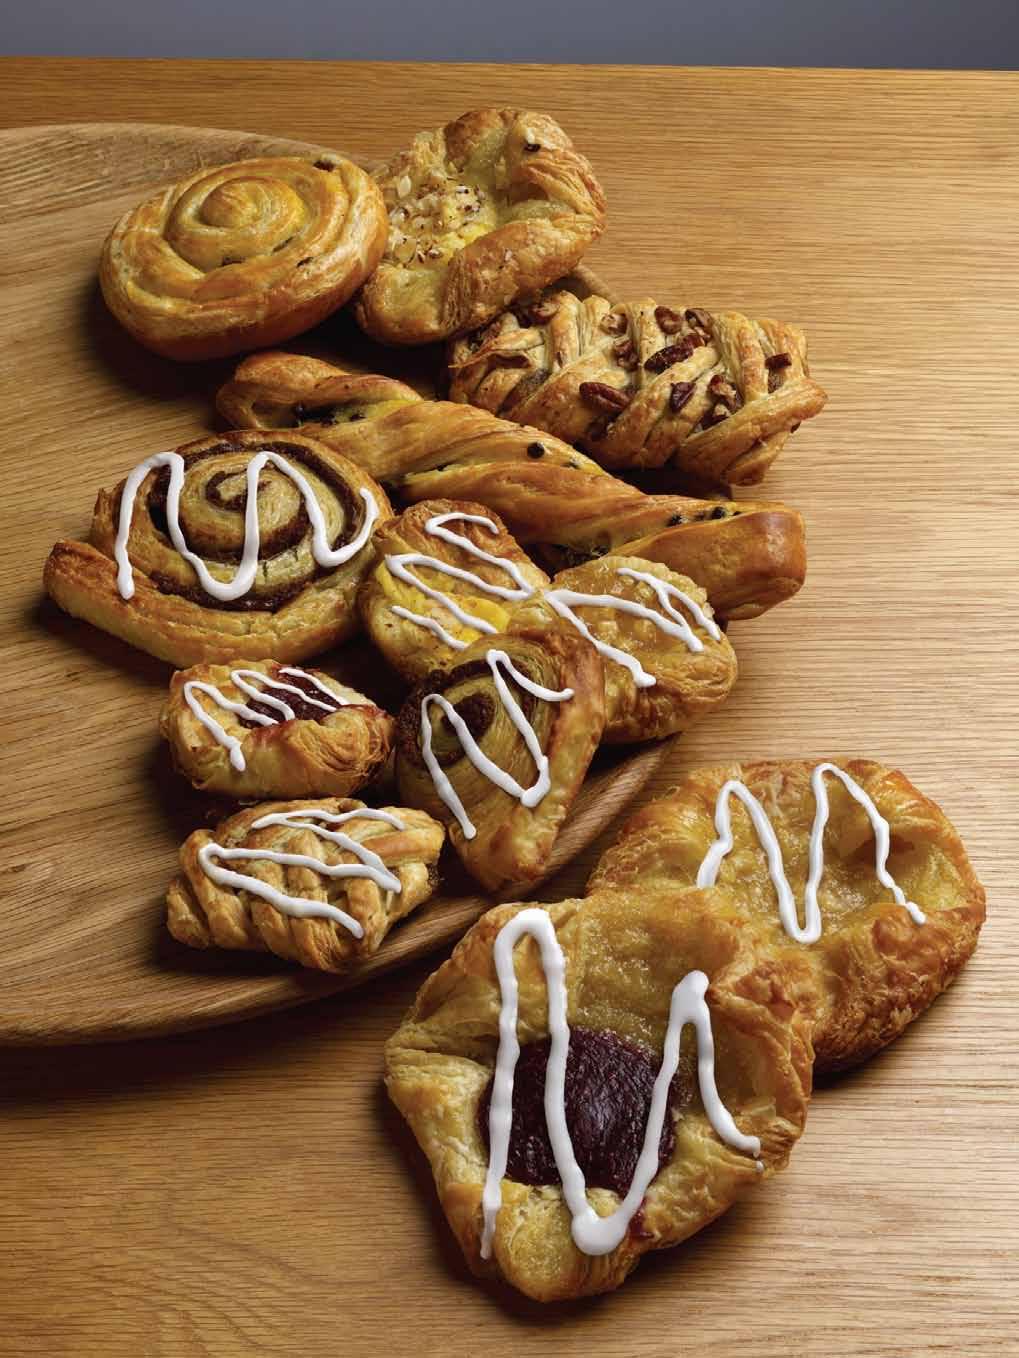 VIENNOISERIE + COFFEE SHOP PASTRIES 6022 LARGE MIXED DANISH PASTRY 6018 MINI MIXED DANISH PASTRY 5 5 5 LARGE MIXED DANISH PASTRY 6022 Mixed selection of large Danish pastries, containing Danish